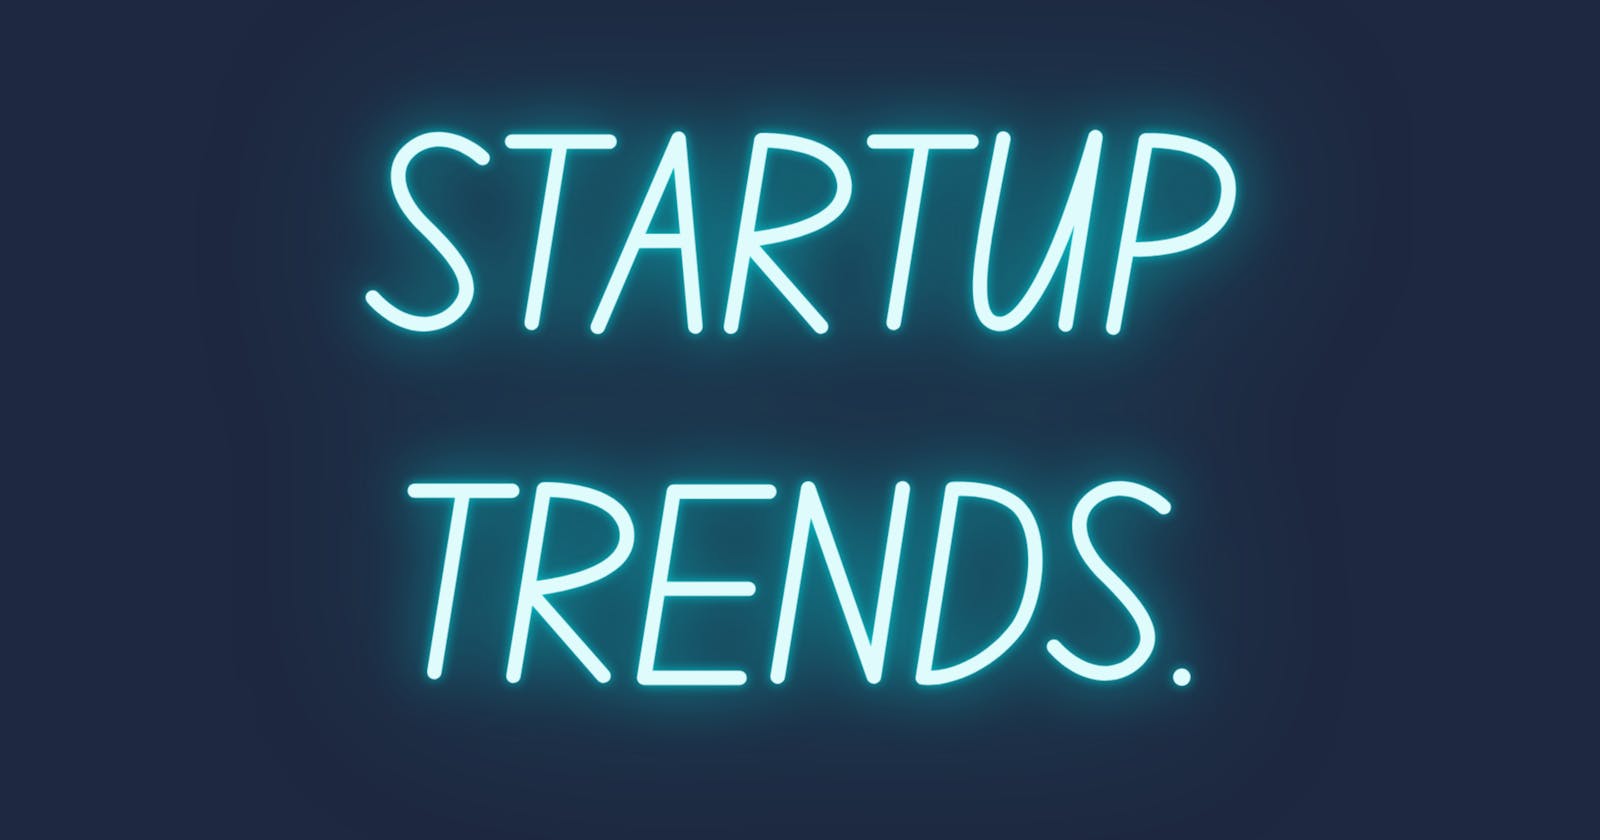 Startup trends for 2021.